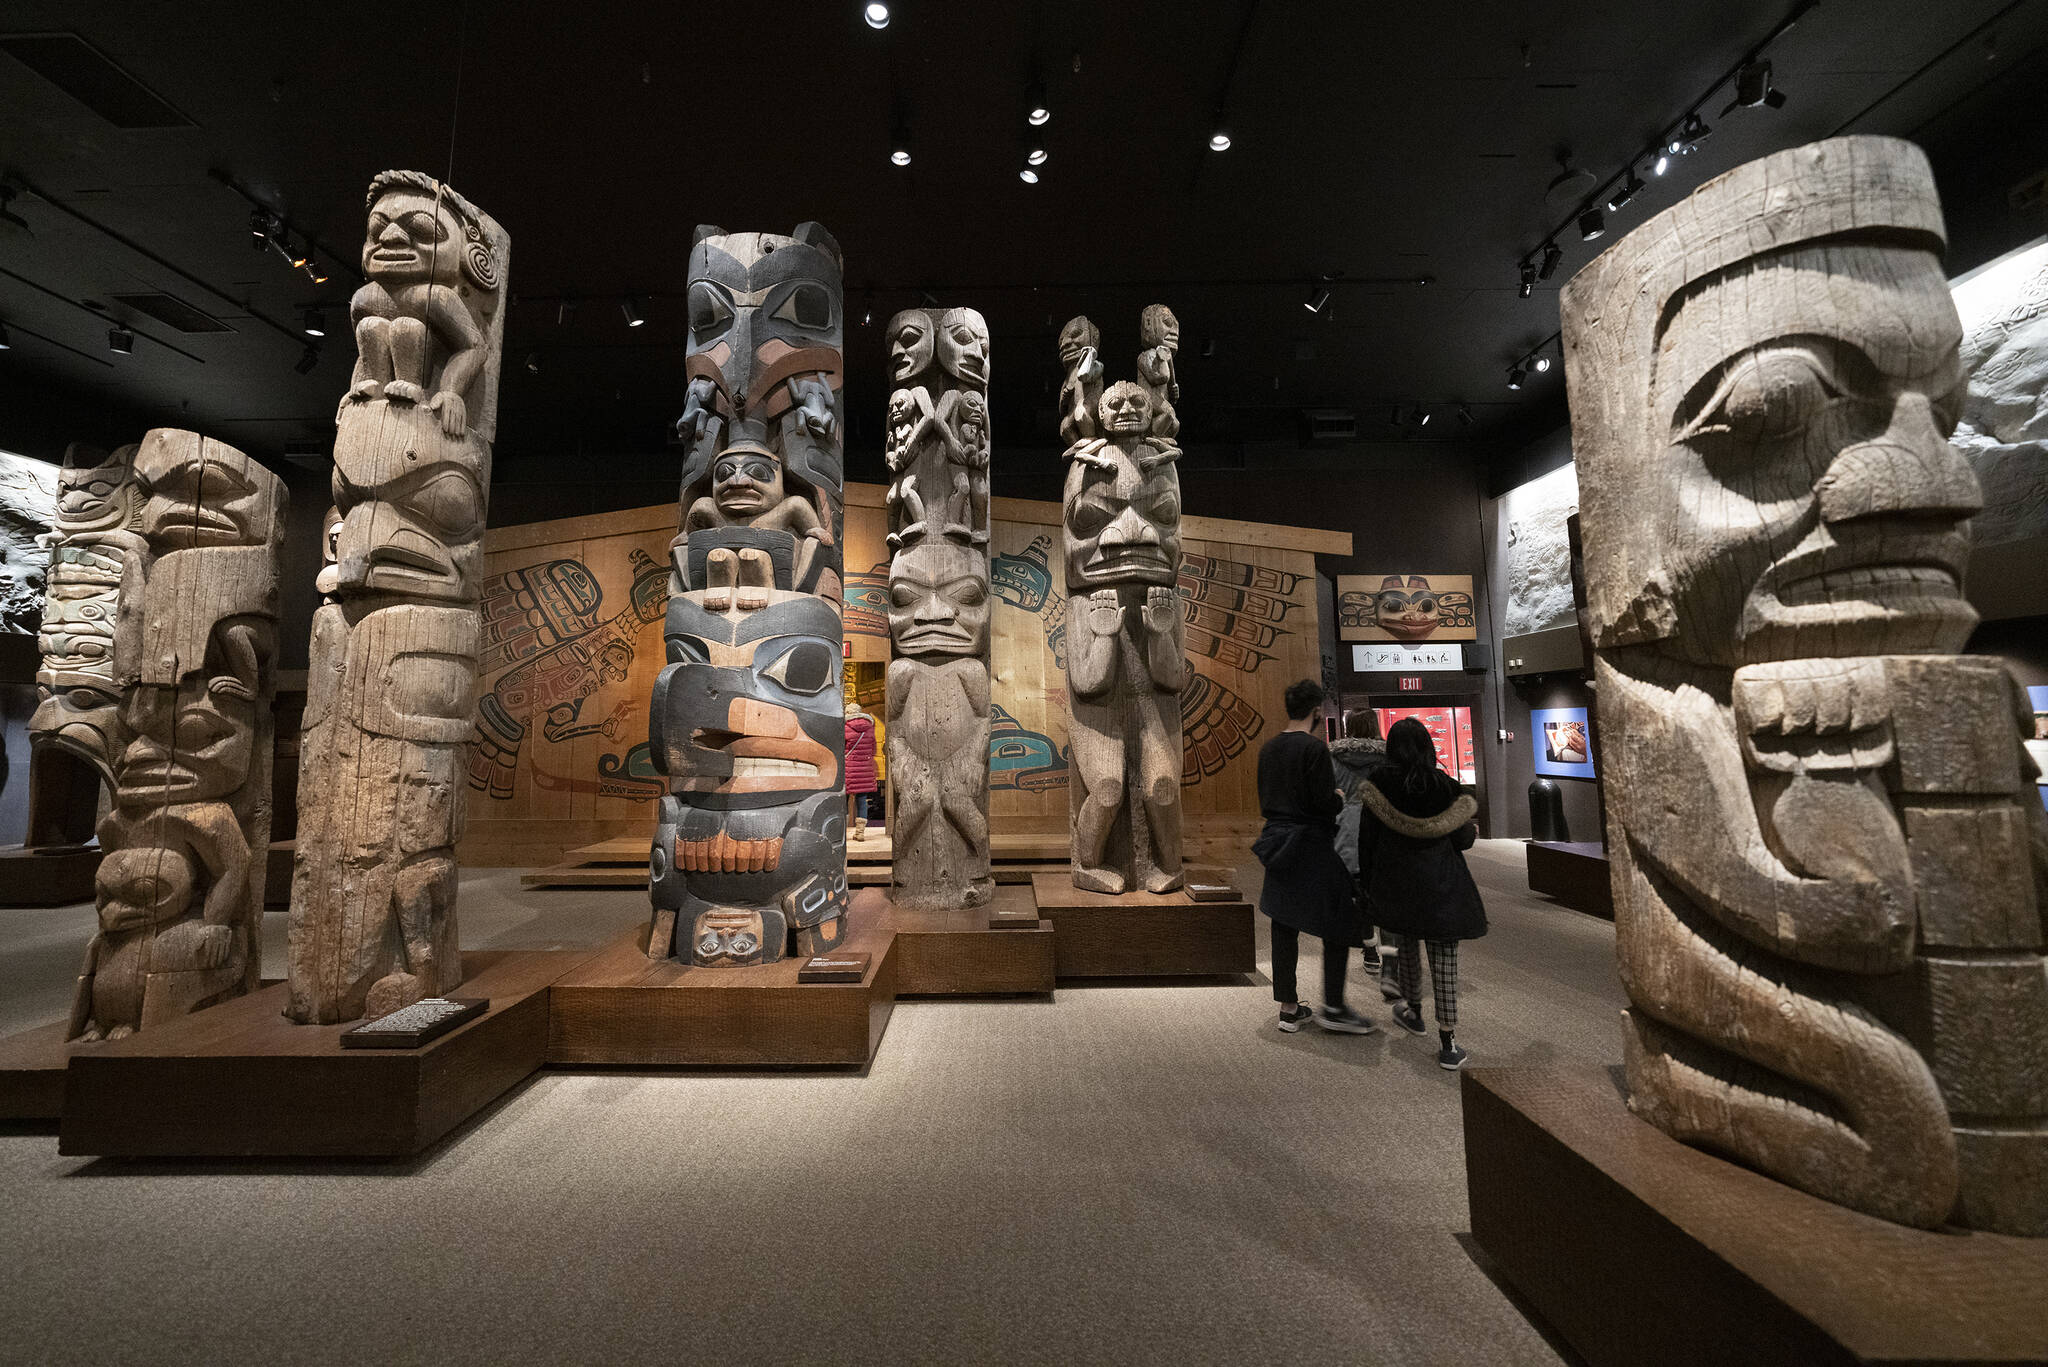 An exhibit from the third floor of B.C. Royal Museum is pictured in Victoria, Wednesday, December 29, 2021. The museum announced that it will be closing the third floor including parts of the First Peoples Gallery in an effort to decolonize the institution. THE CANADIAN PRESS/Jonathan Hayward